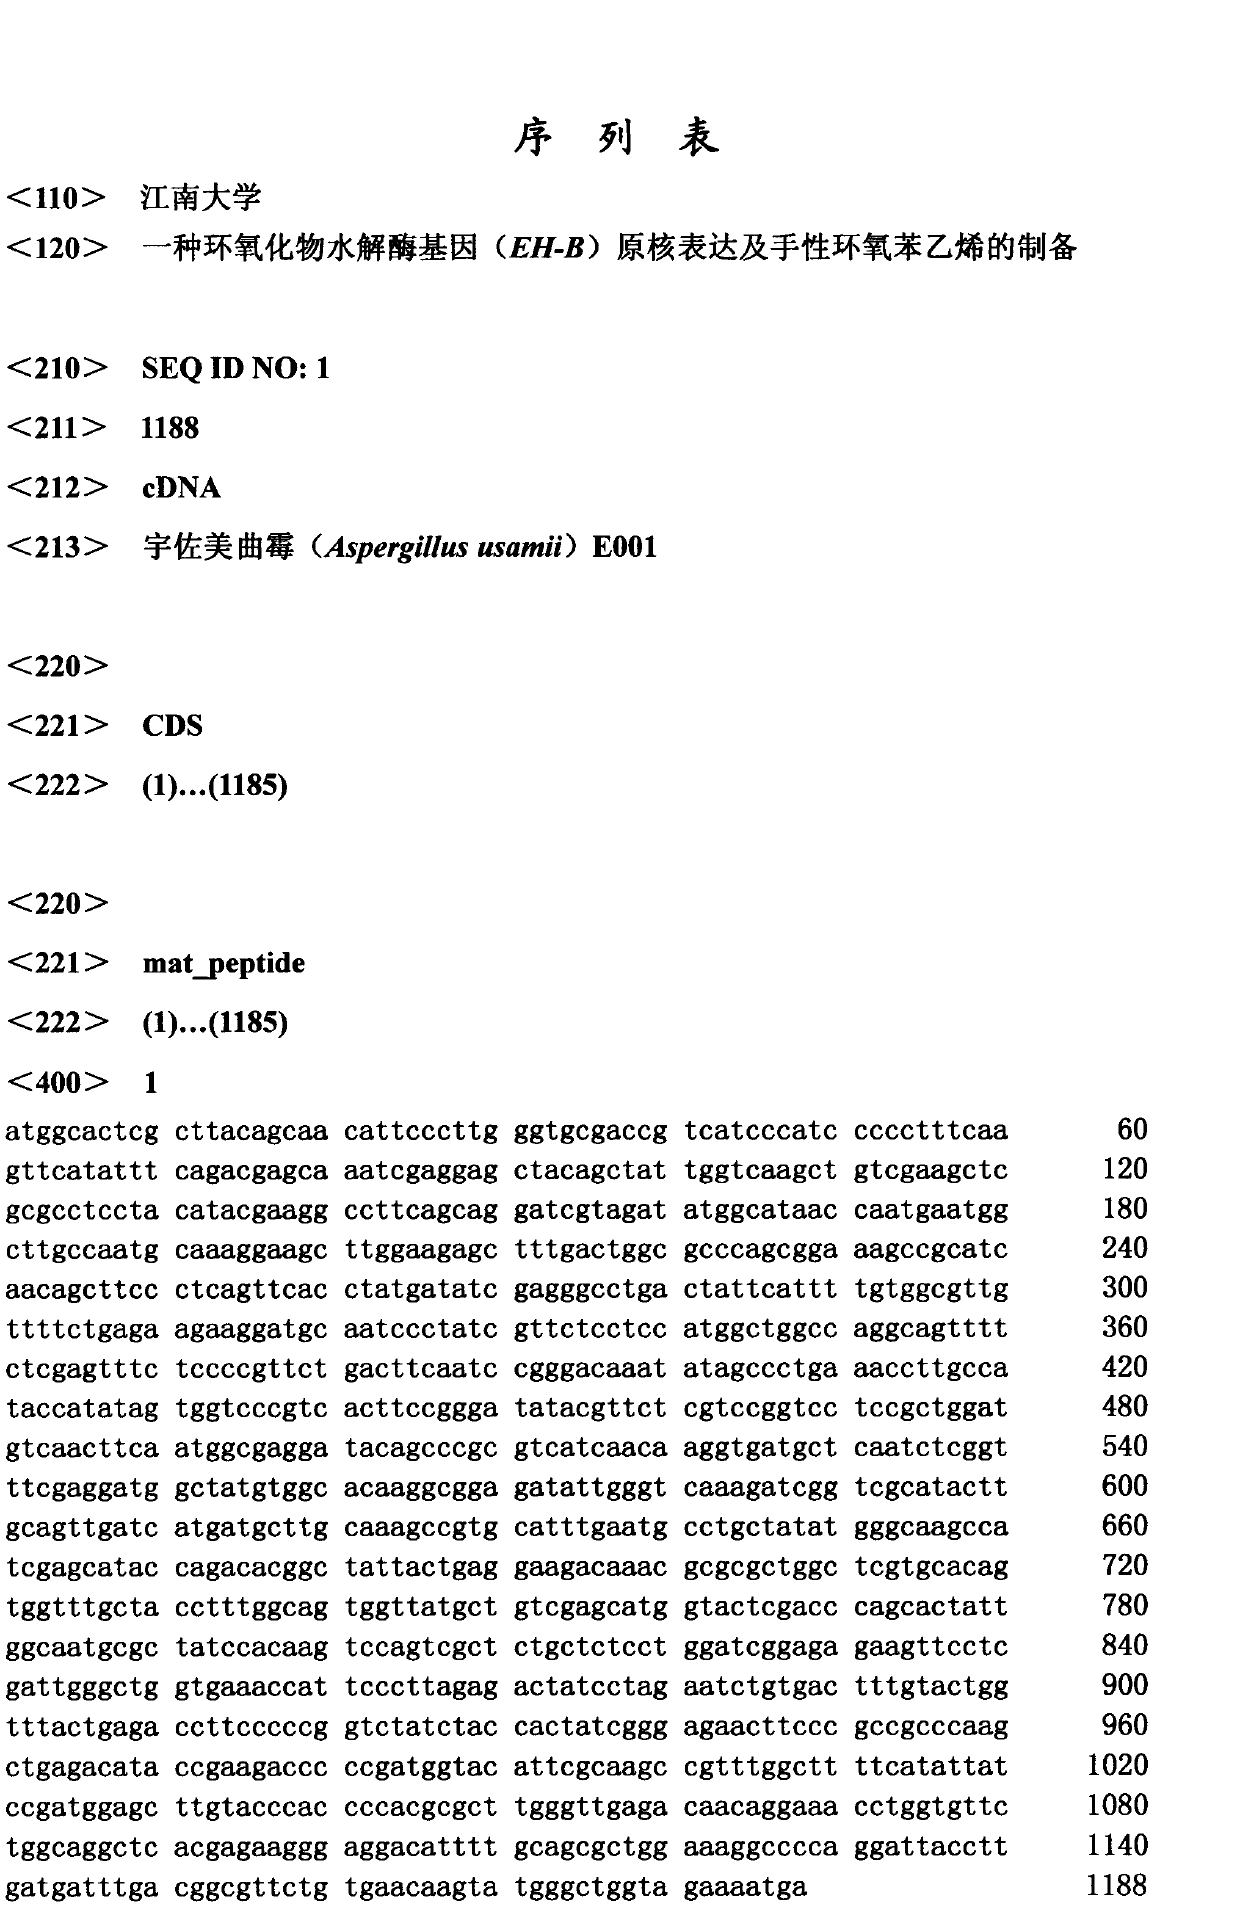 Pronucleus expression of epoxide hydrolase gene (EH-B) and preparation of chiral epichlorohydrin